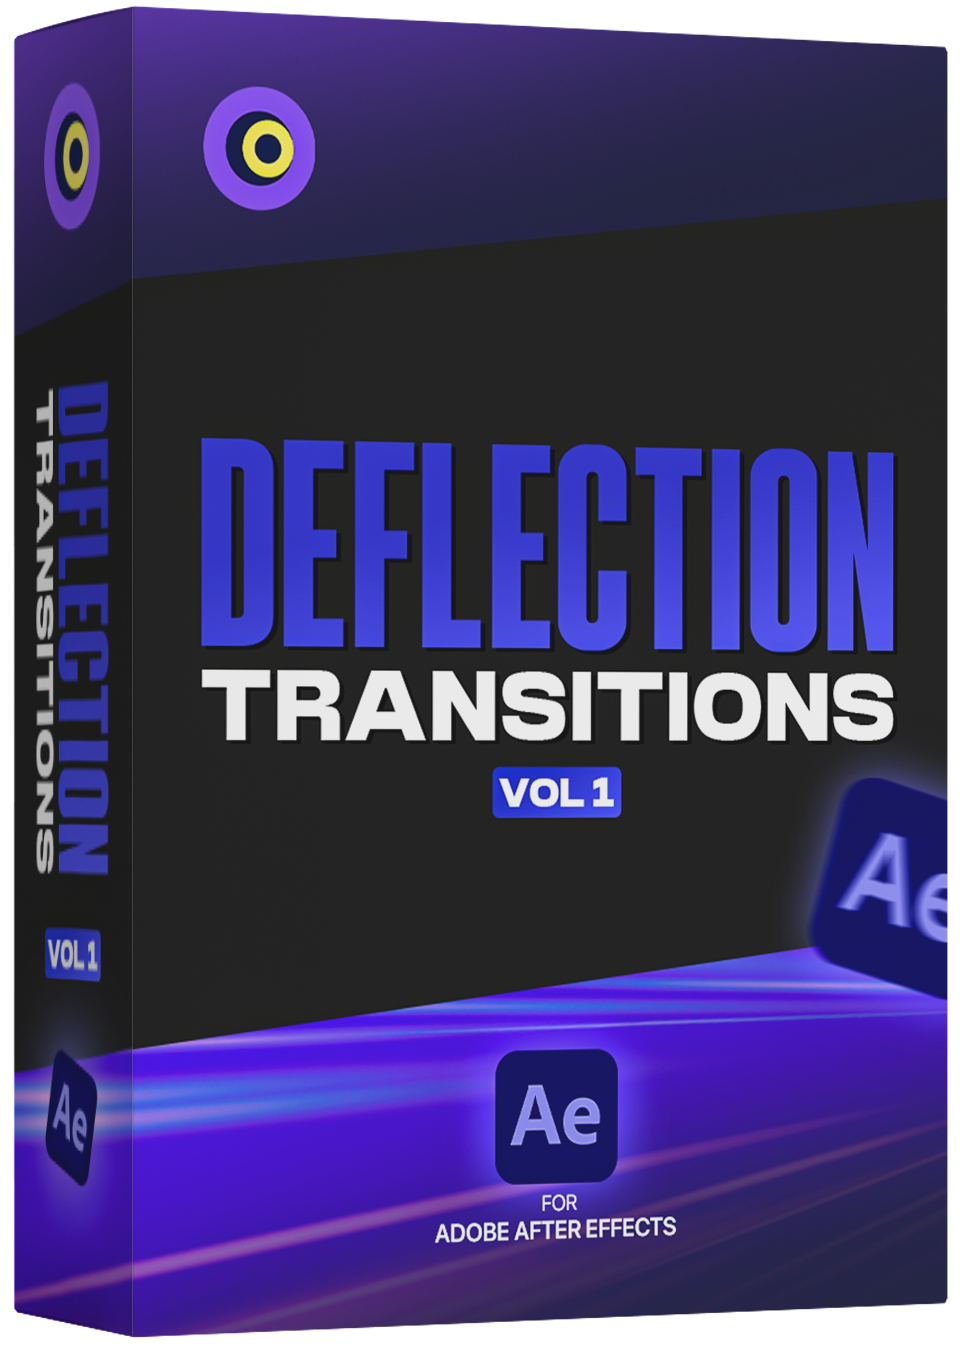 Deflection Transitions Vol 1-Transparent_updated.png__PID:5f39bfdd-573b-4933-9a89-af180426a8c1